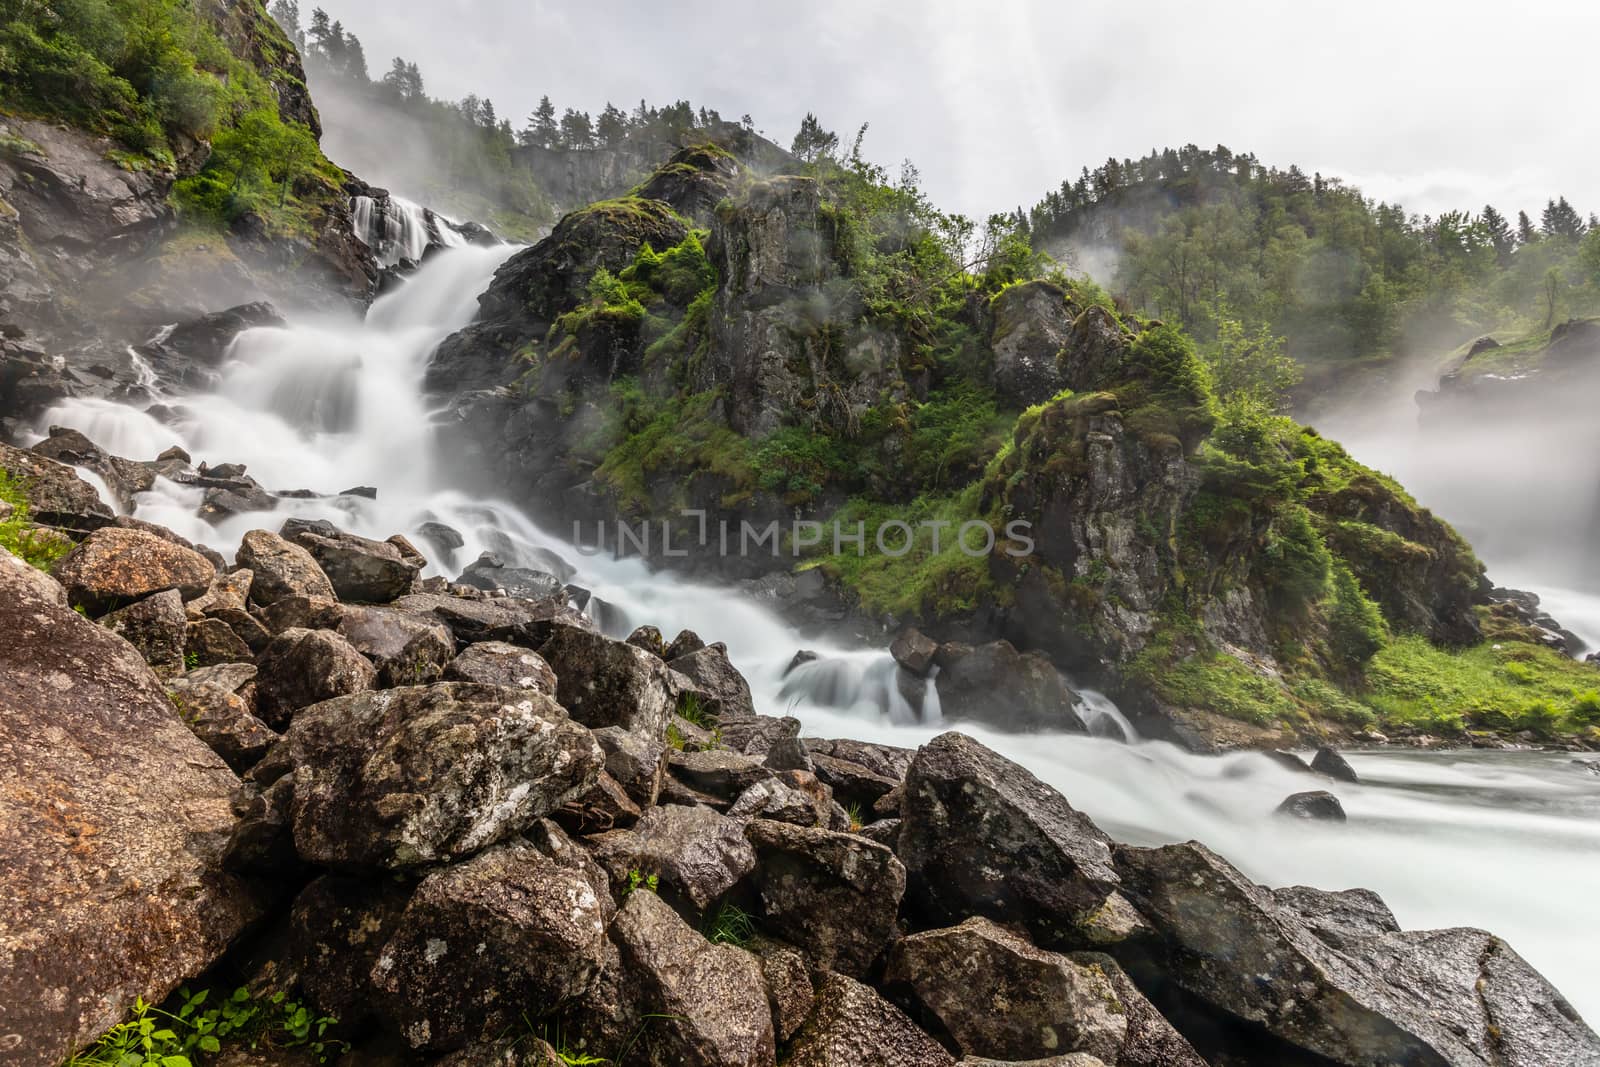 Latefoss waterfalls streams with stones in the foreground, Odda, Hordaland county, Norway